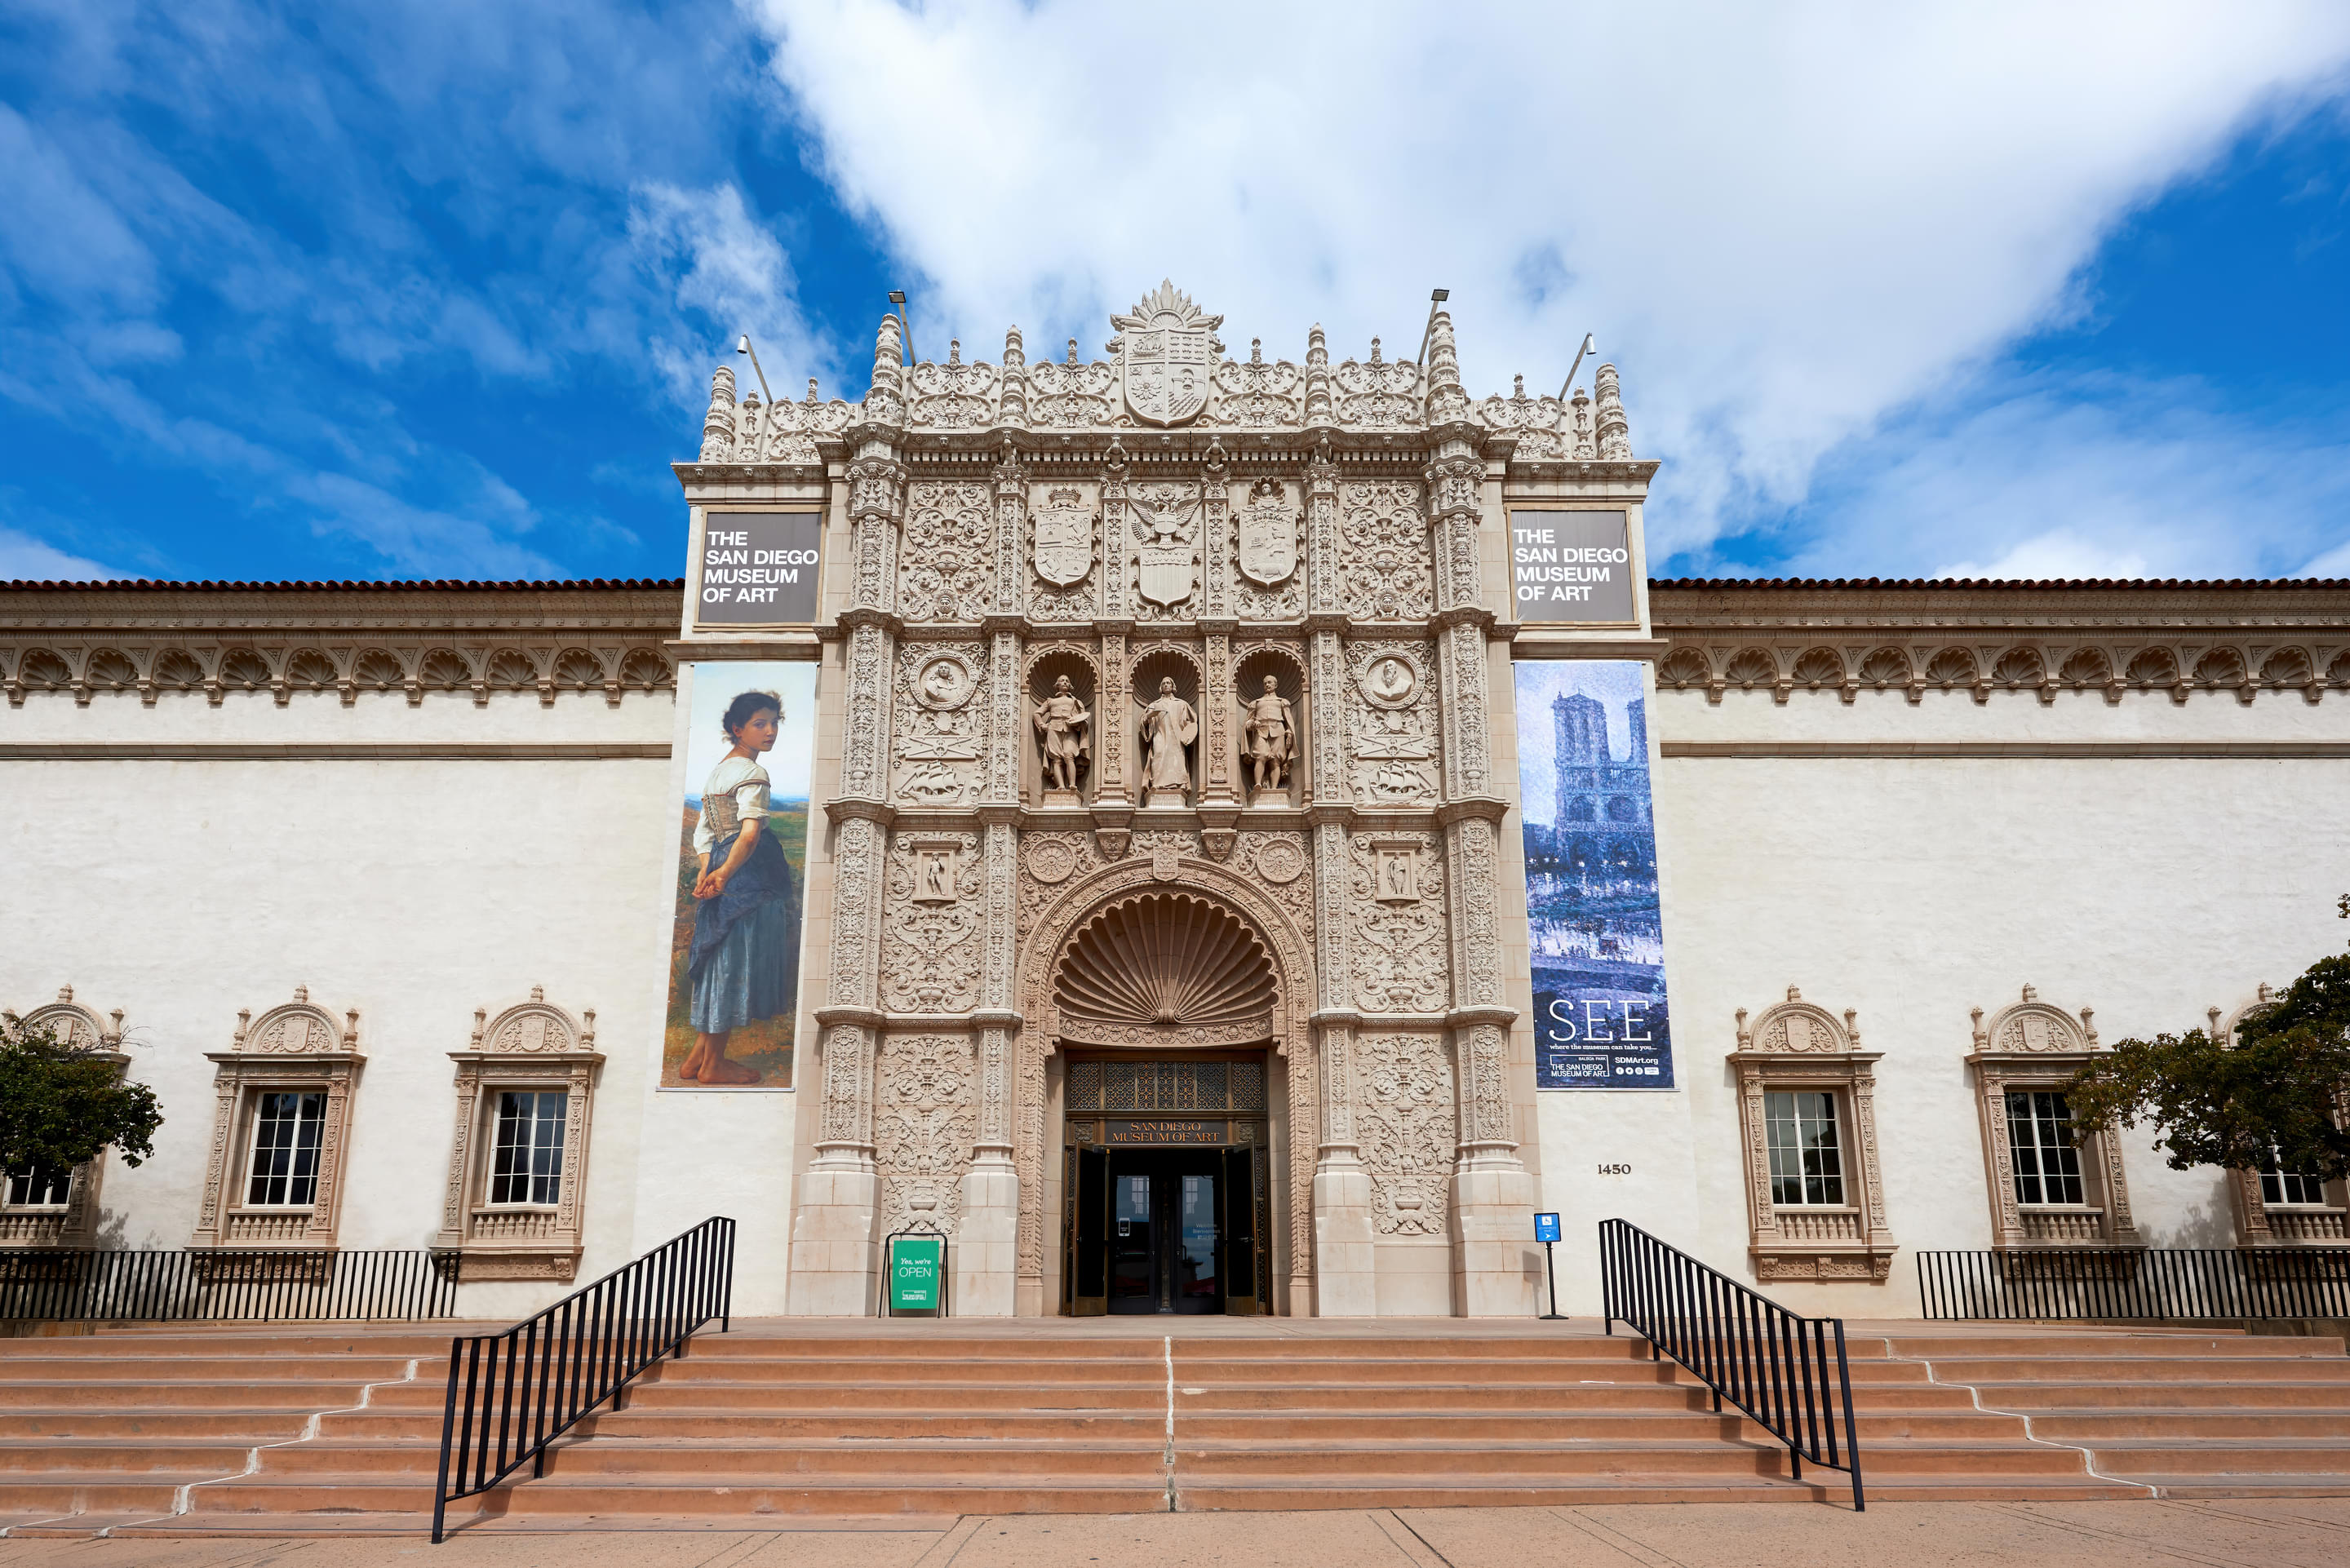 San Diego Museum Of Art Overview